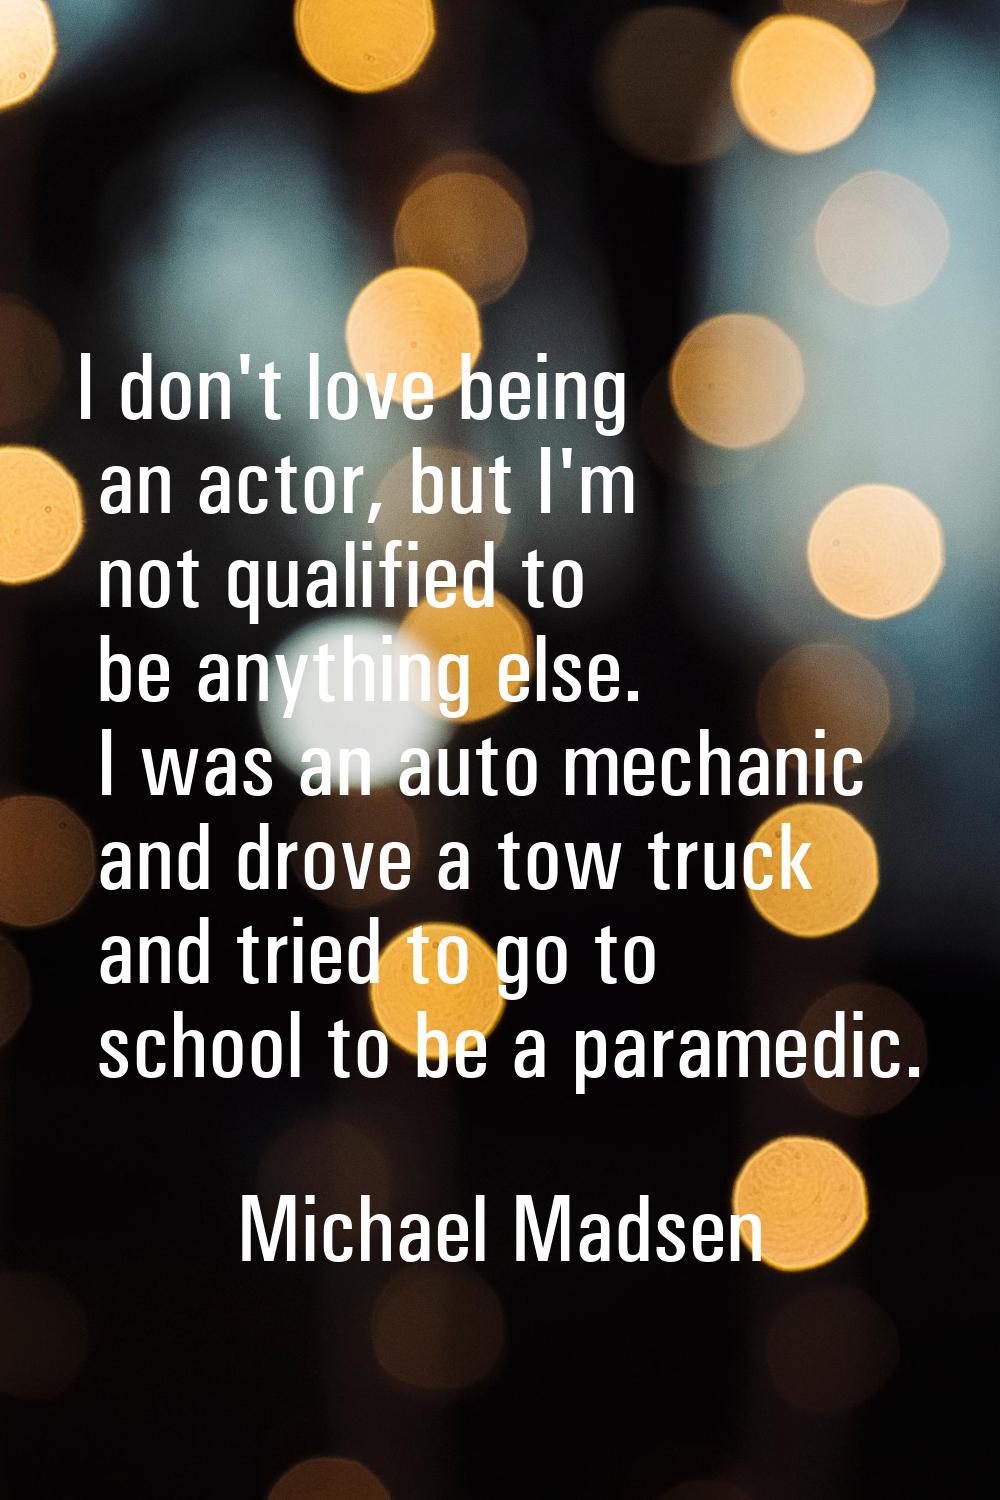 I don't love being an actor, but I'm not qualified to be anything else. I was an auto mechanic and 